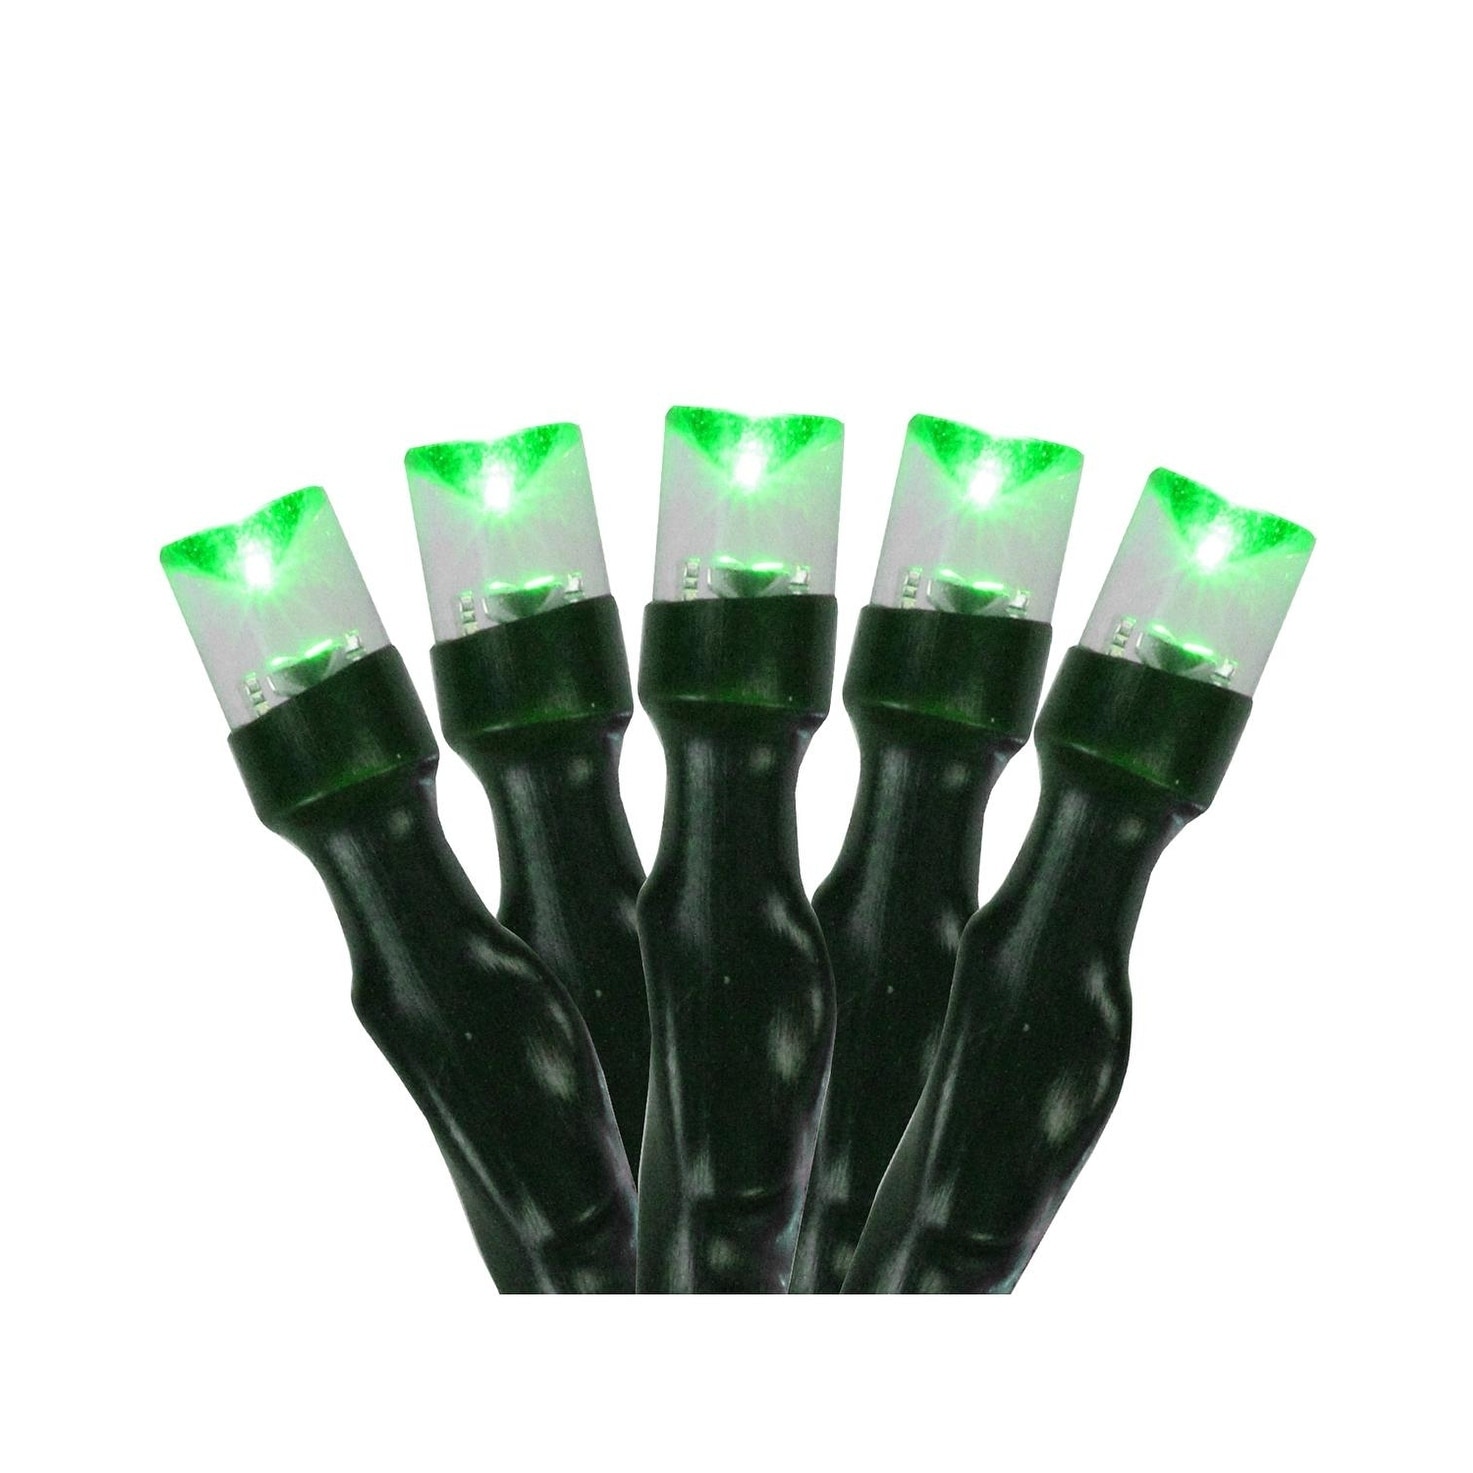 Set of 20 Battery Operated Green LED Wide Angle Christmas Lights - Green Wire